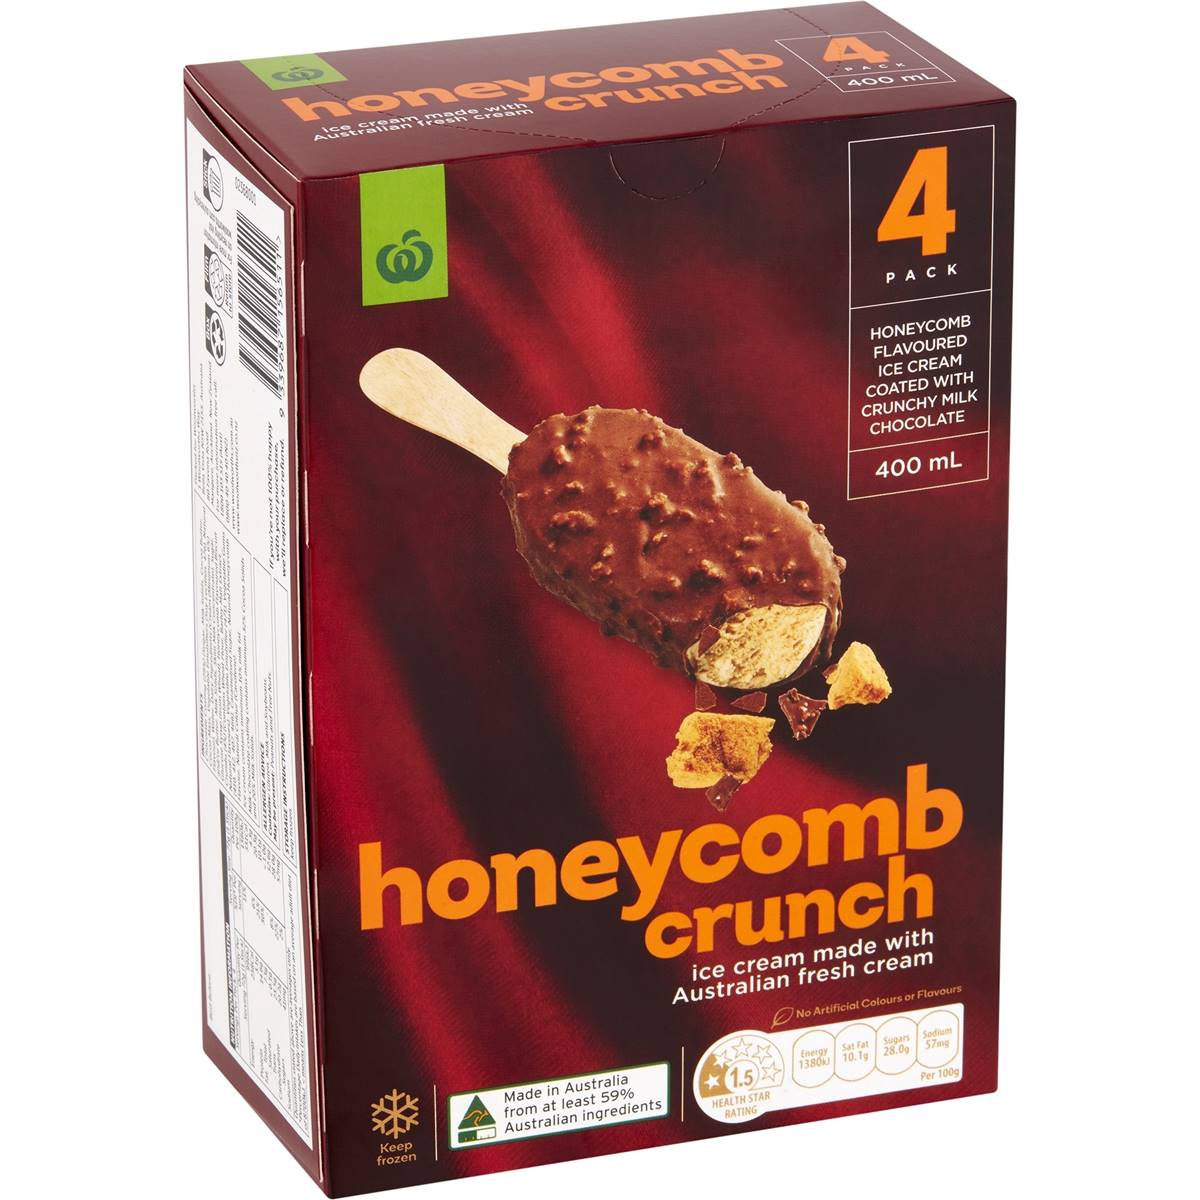 Calories in Woolworths Honeycomb Crunch Ice Cream